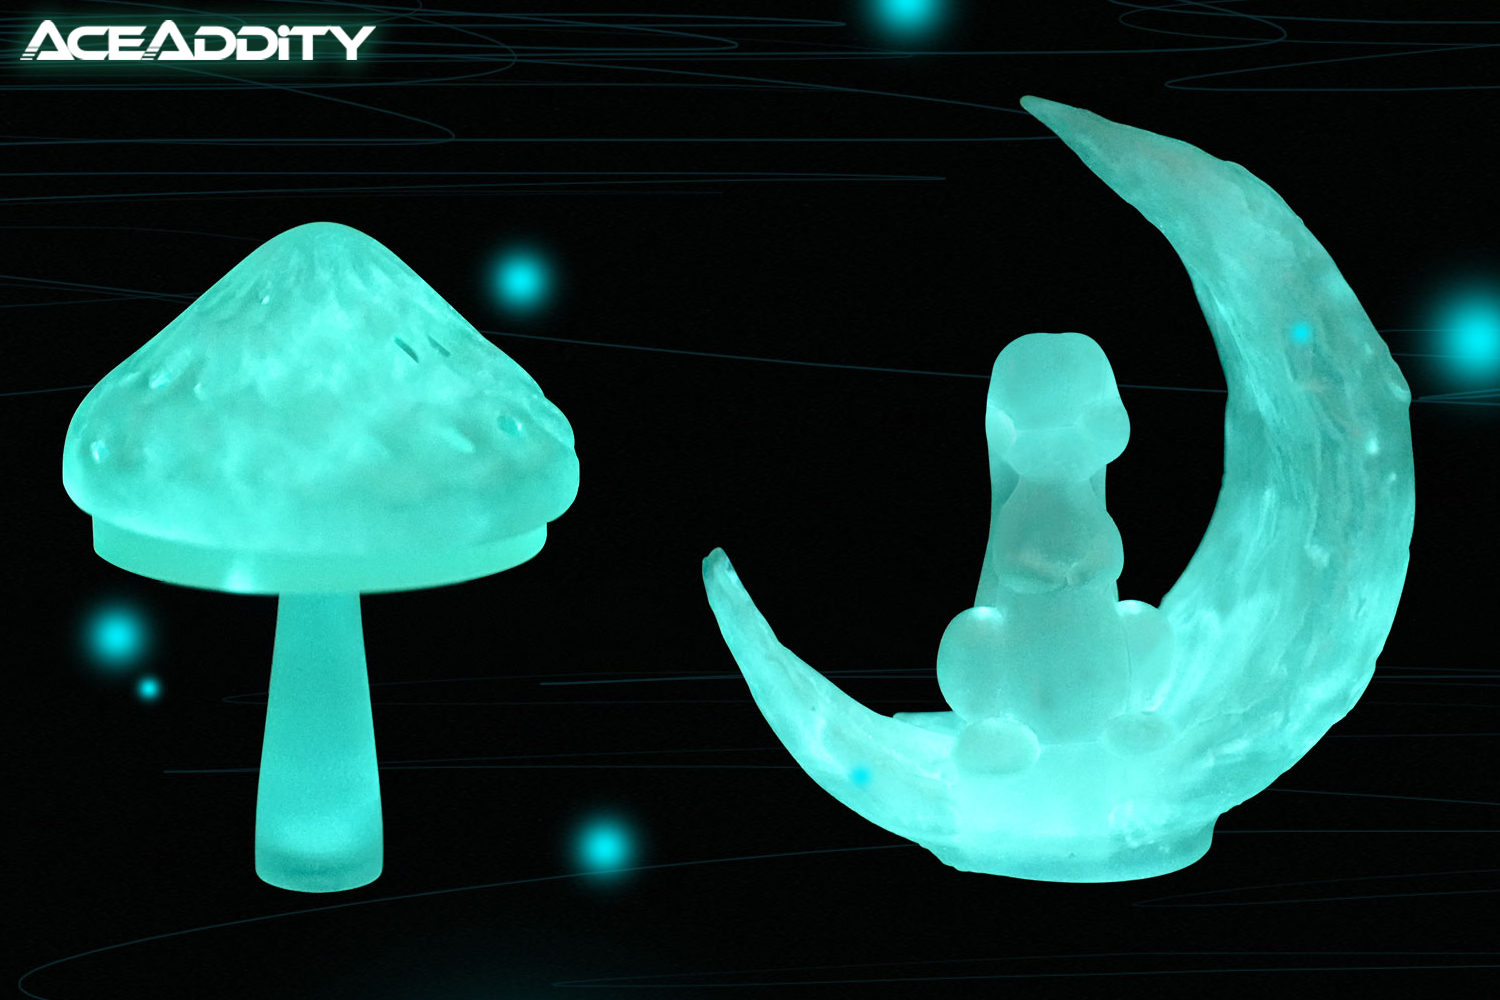 Let Me Light Up Your World – Meet Aceaddity's Glow-in-the-Dark Resin!